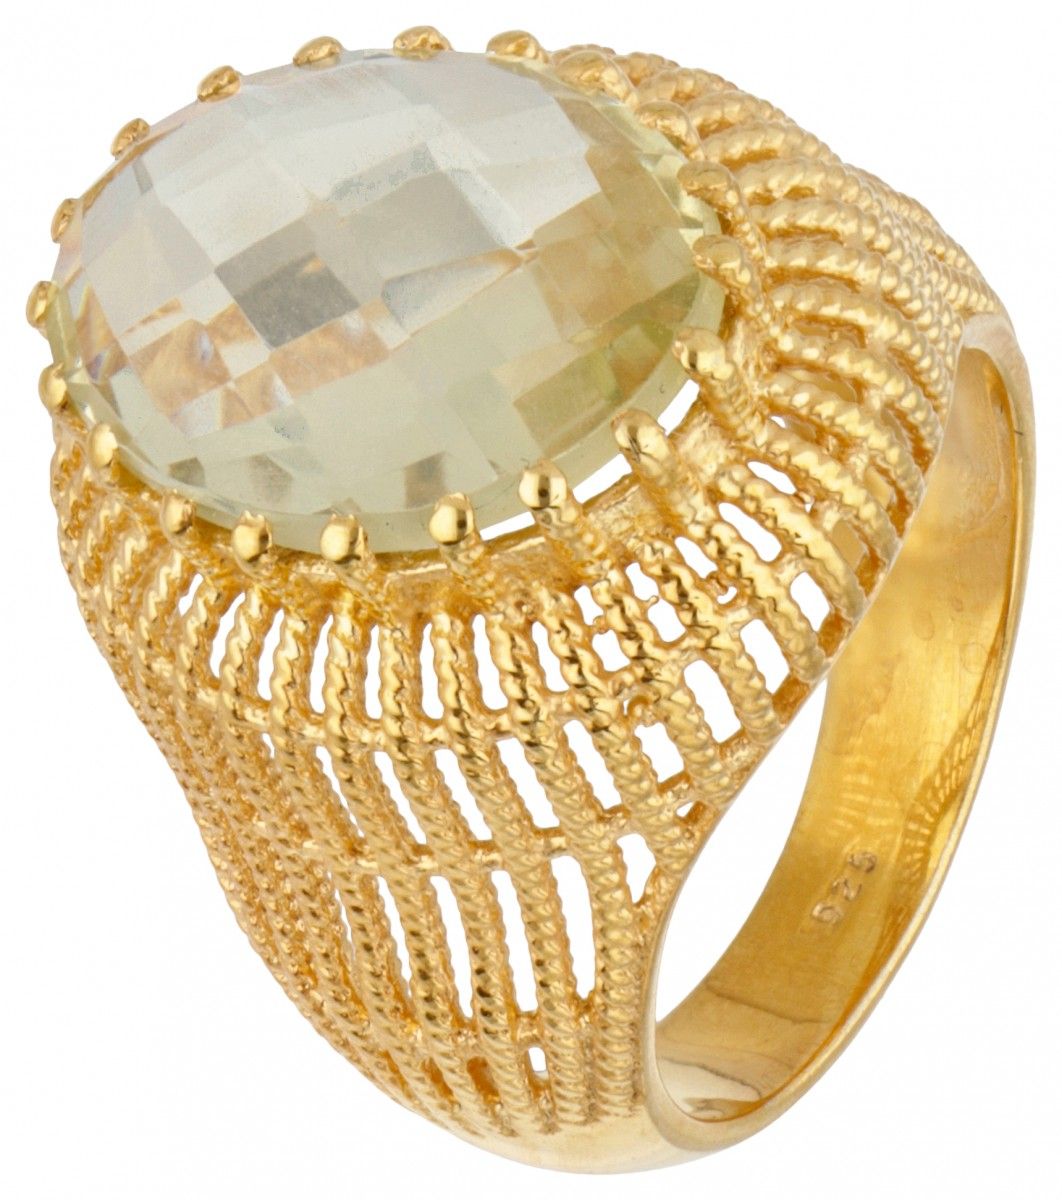 Gold plated silver ring set with approx. 5.98 ct. Lemon quartz - 925/1000. Hallm&hellip;